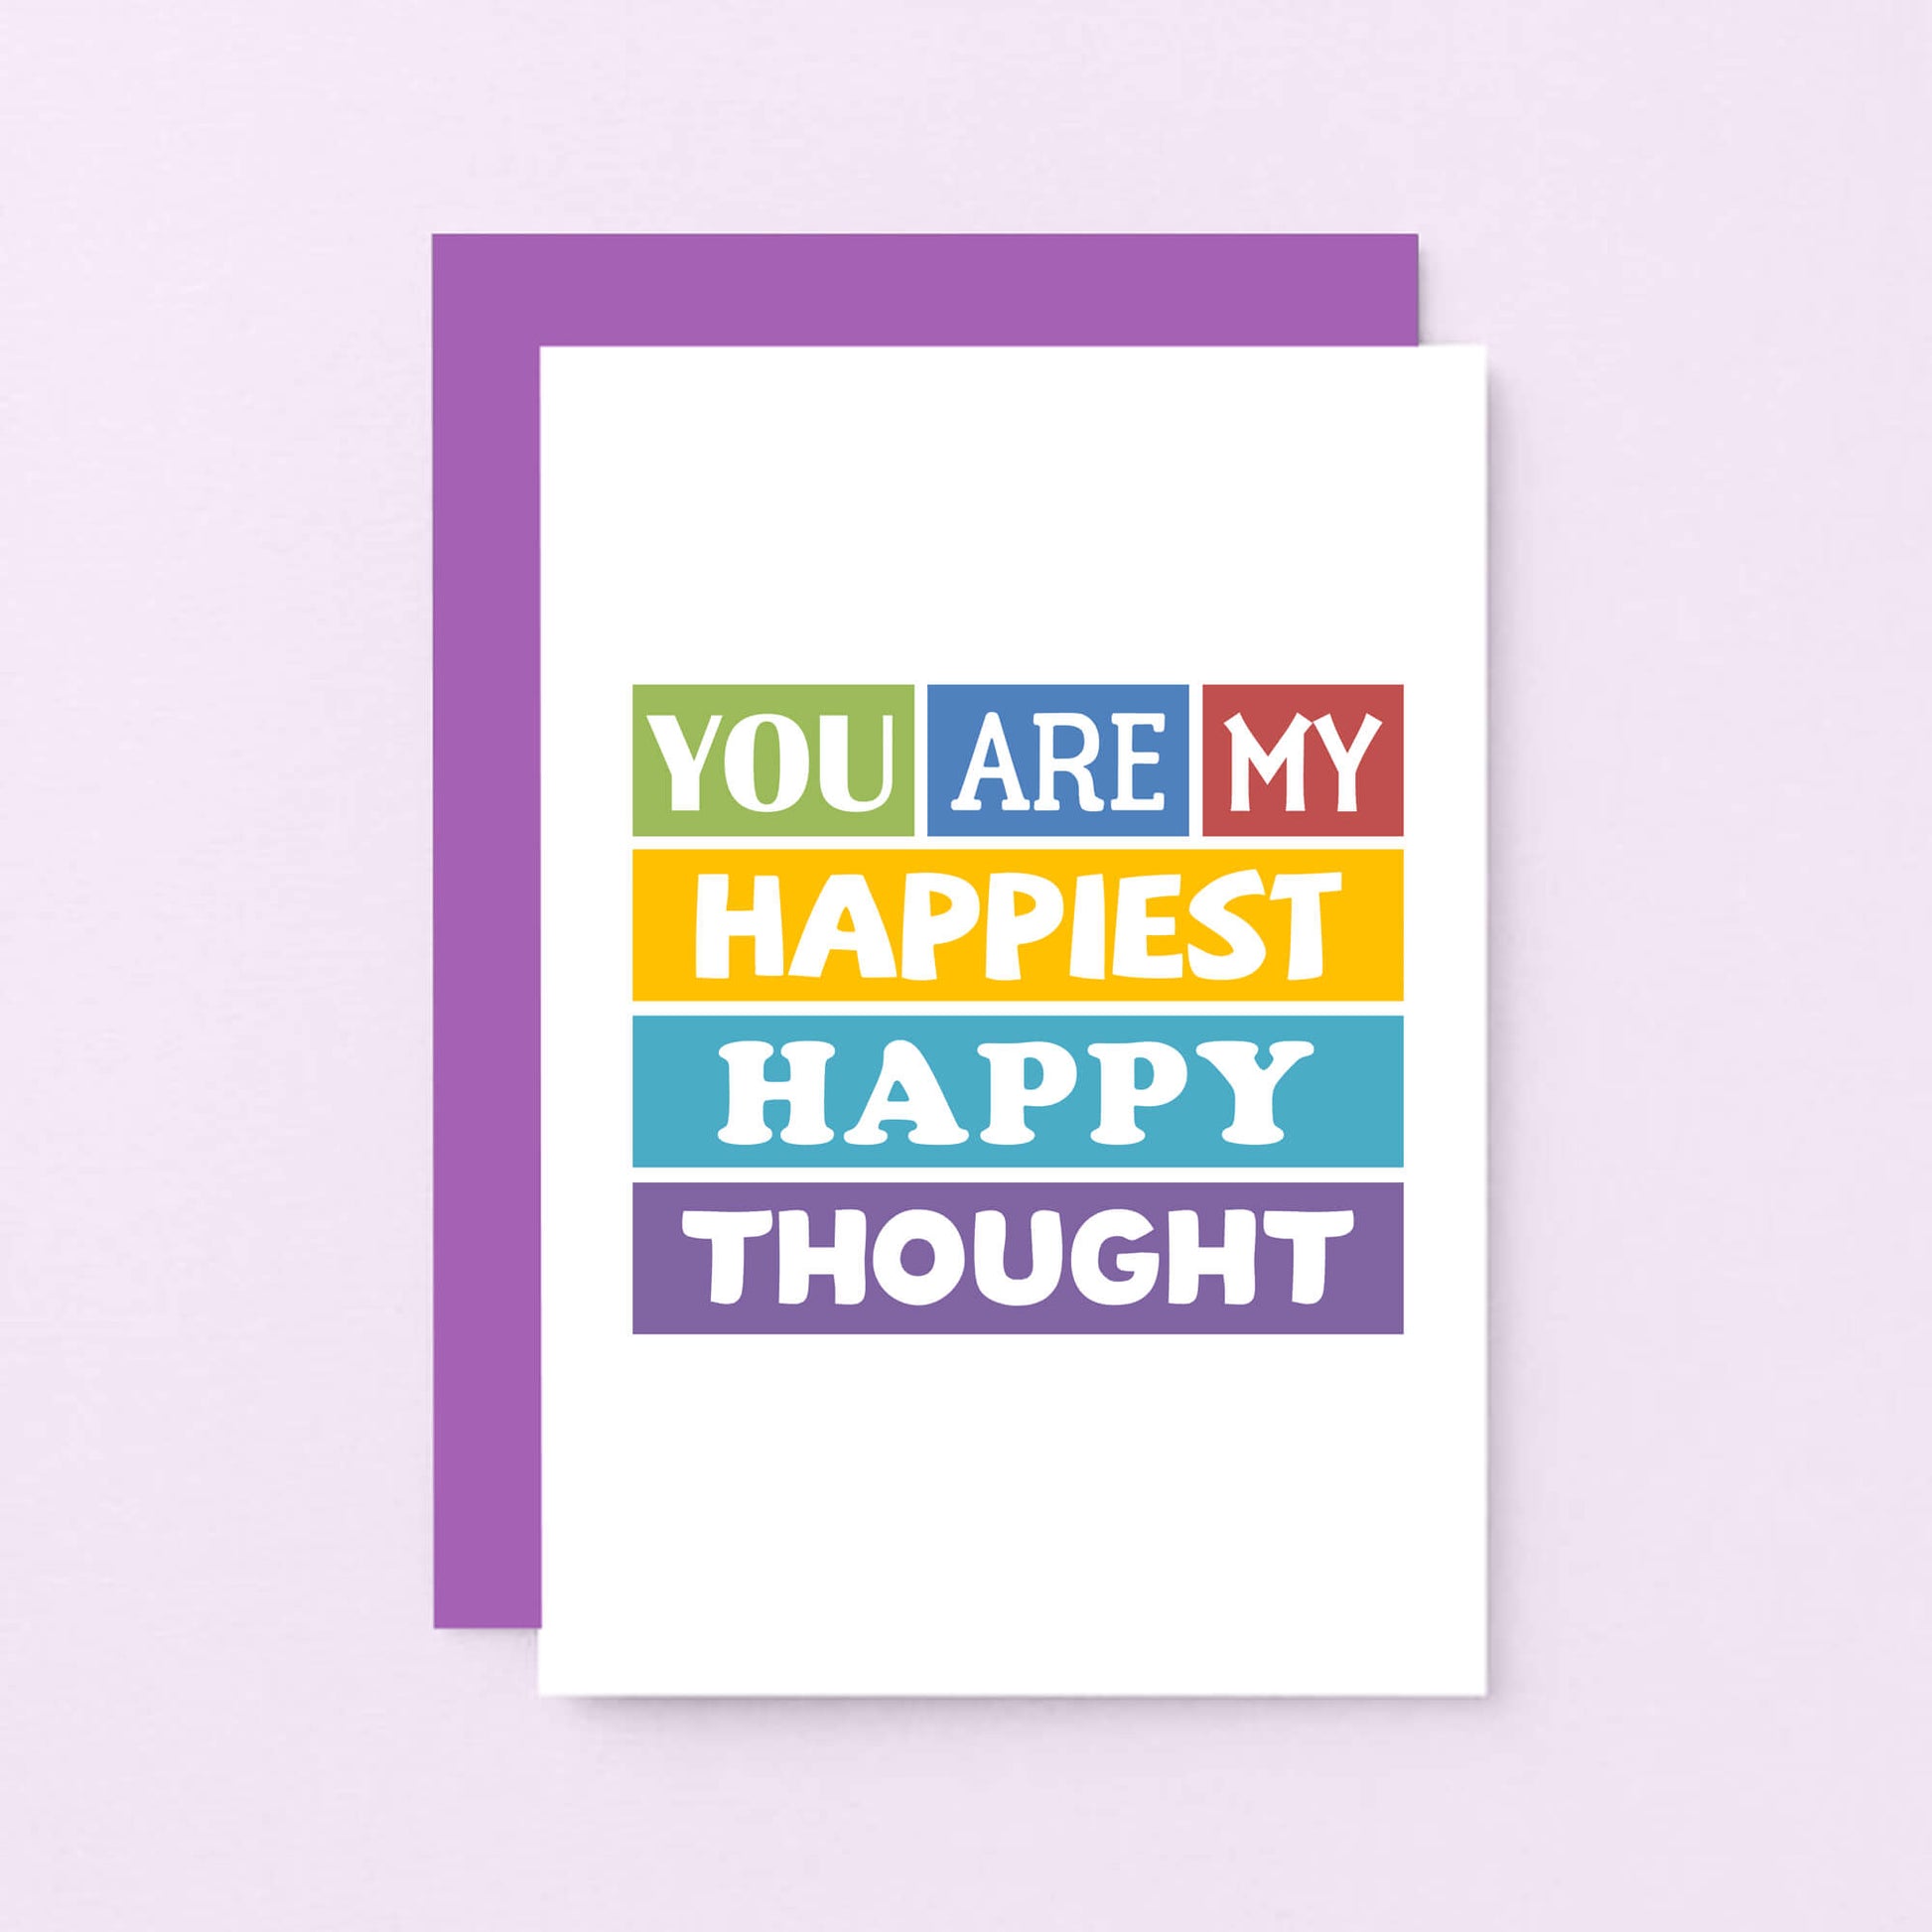 Love Card by SixElevenCreations. Reads You are my happiest happy thought card. Product Code SE0159A6